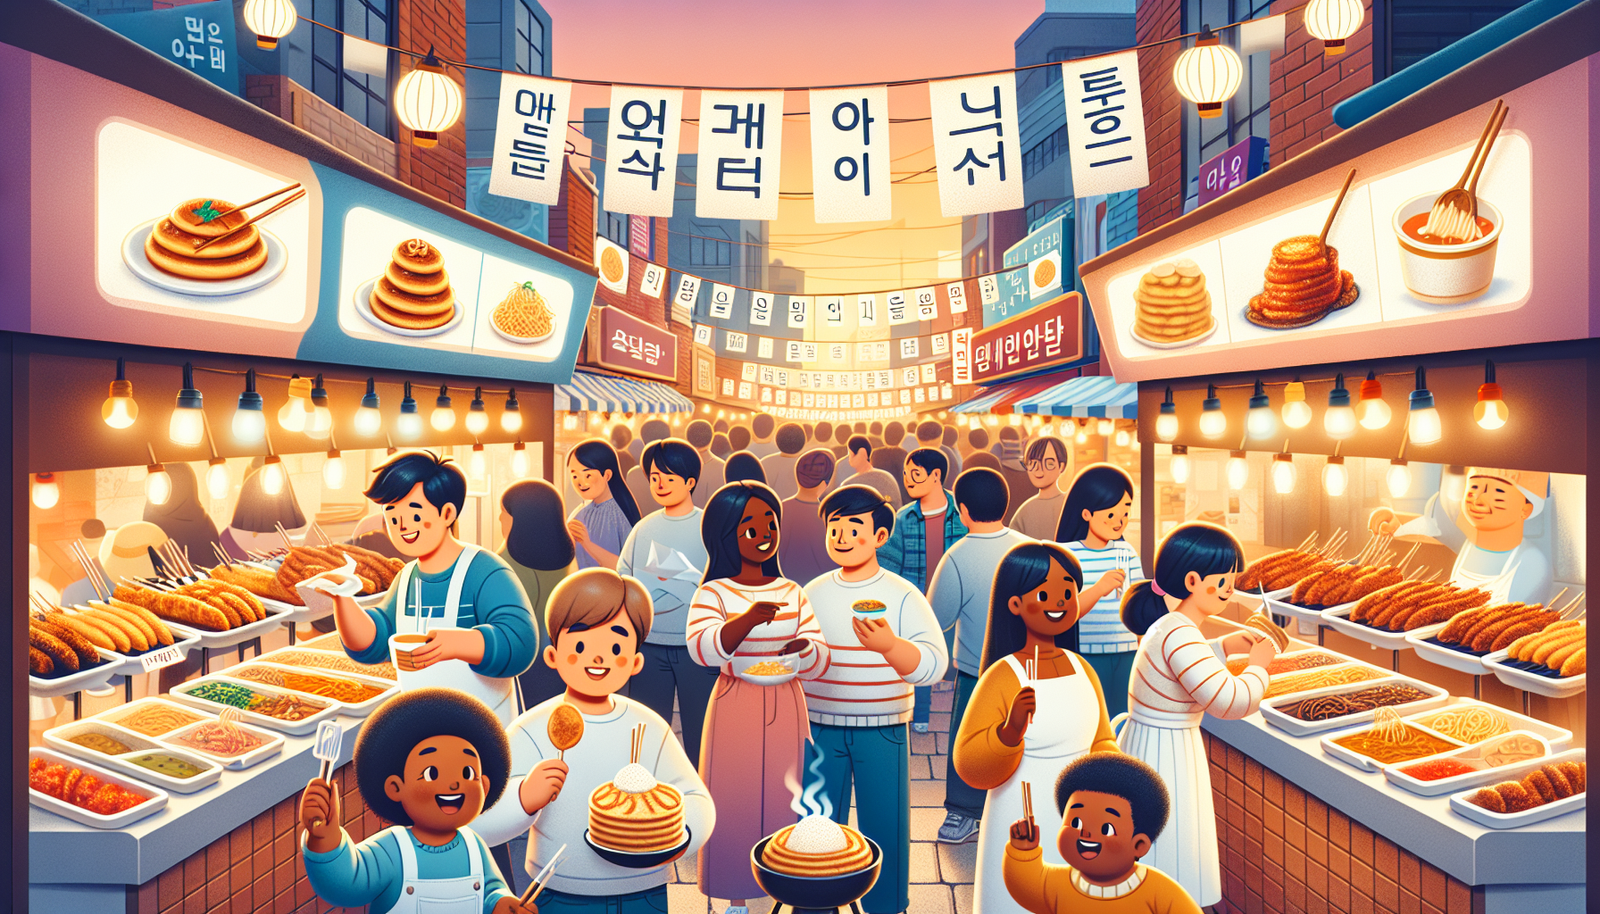 What Are Some Popular Street Food Dishes In Korea?